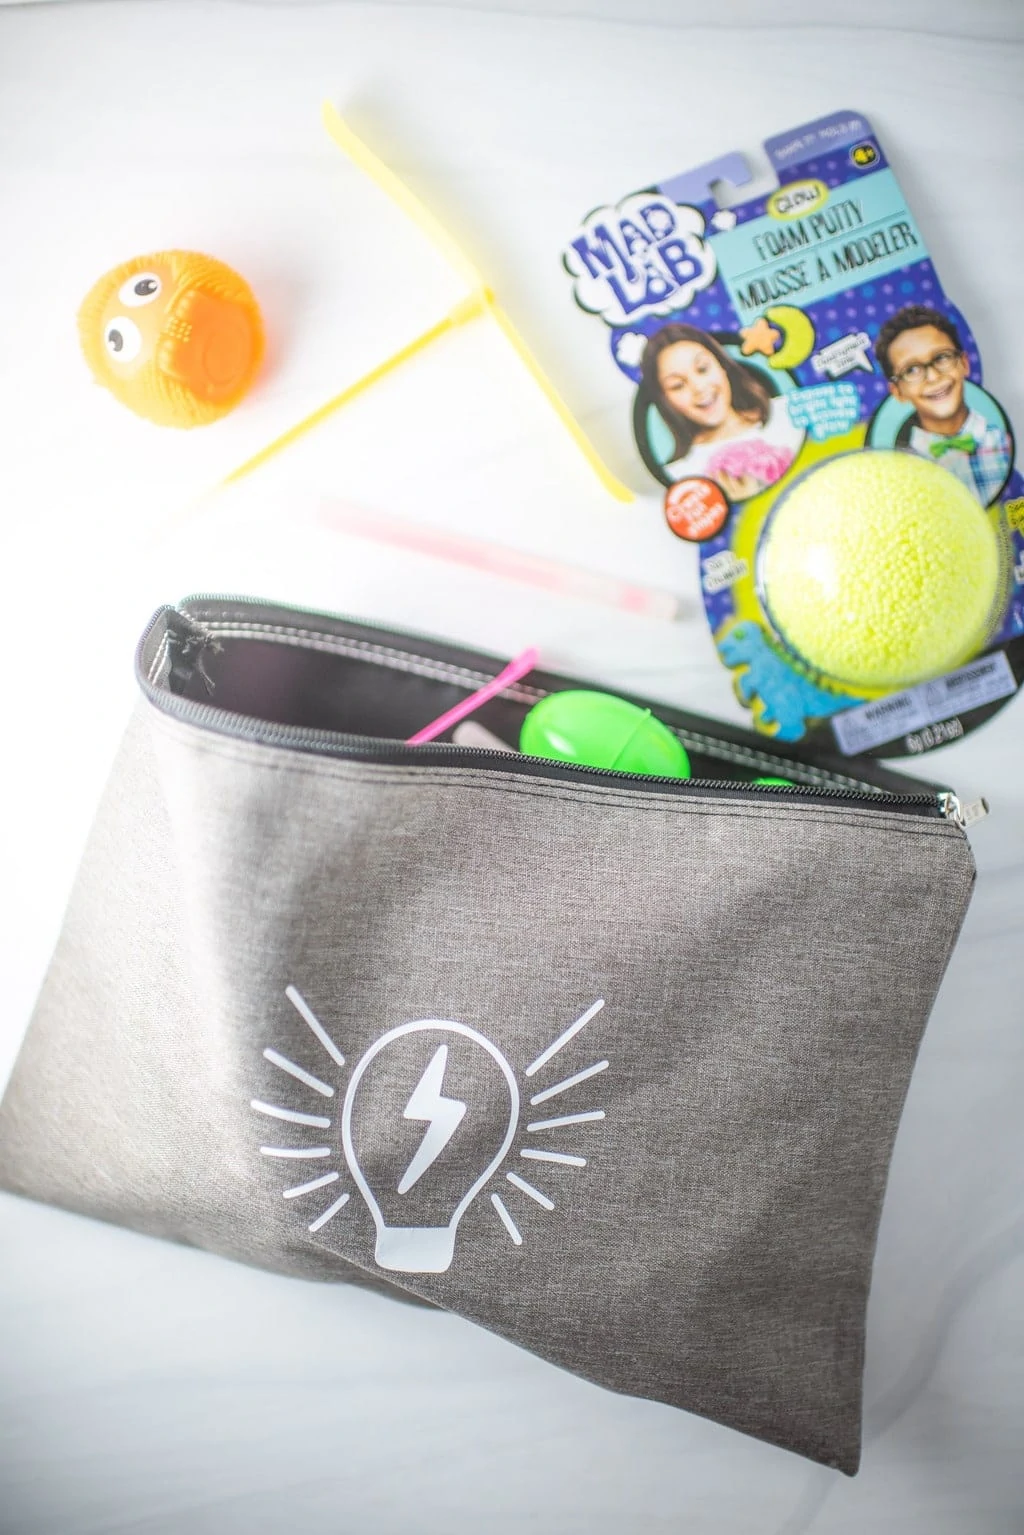 Glow themed busy bags for kids